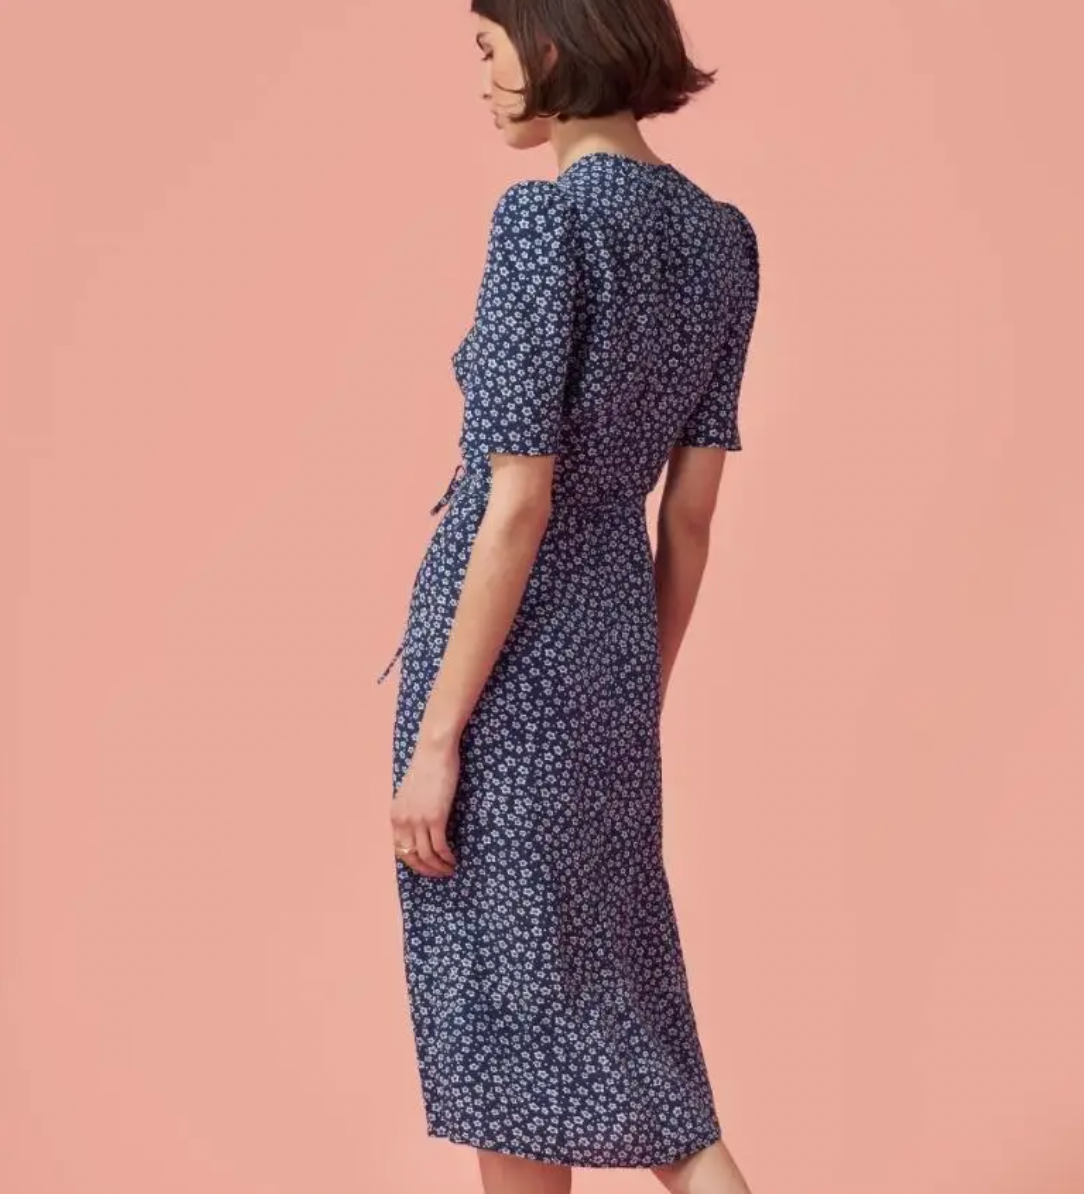 Indulge in the elegance of the Eloise Dress. Made with lightweight cotton, this floral-printed dress boasts a relaxed fit and short sleeves for effortless style. Perfect for any occasion, experience the luxury of comfort and beauty in one.